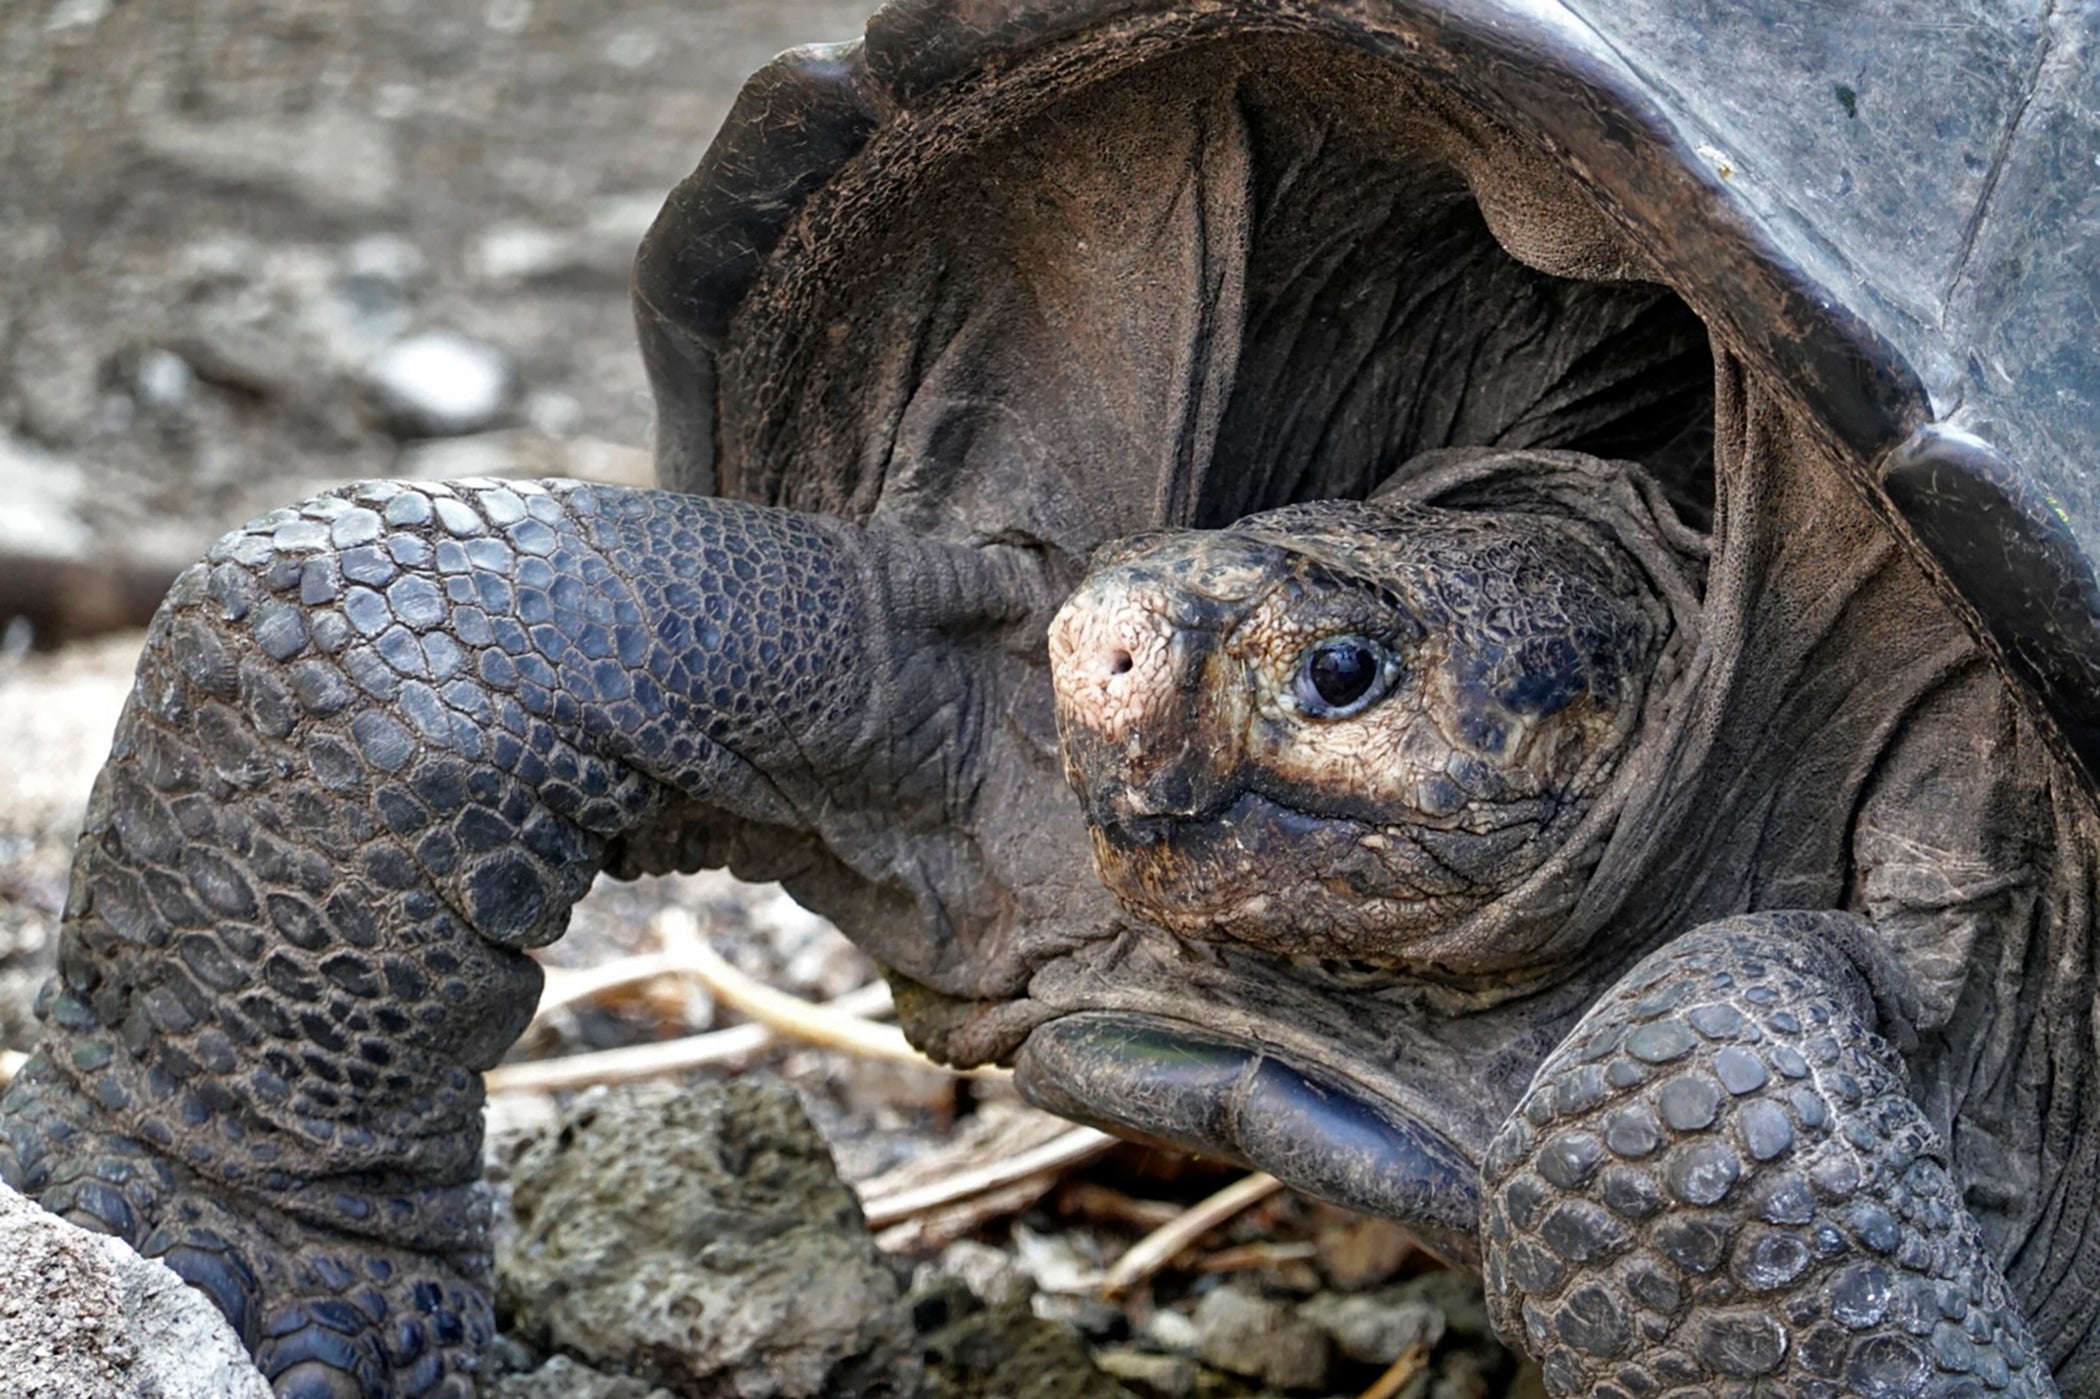 The elderly female Fernandina giant tortoise is believed to be more than 100 years old.